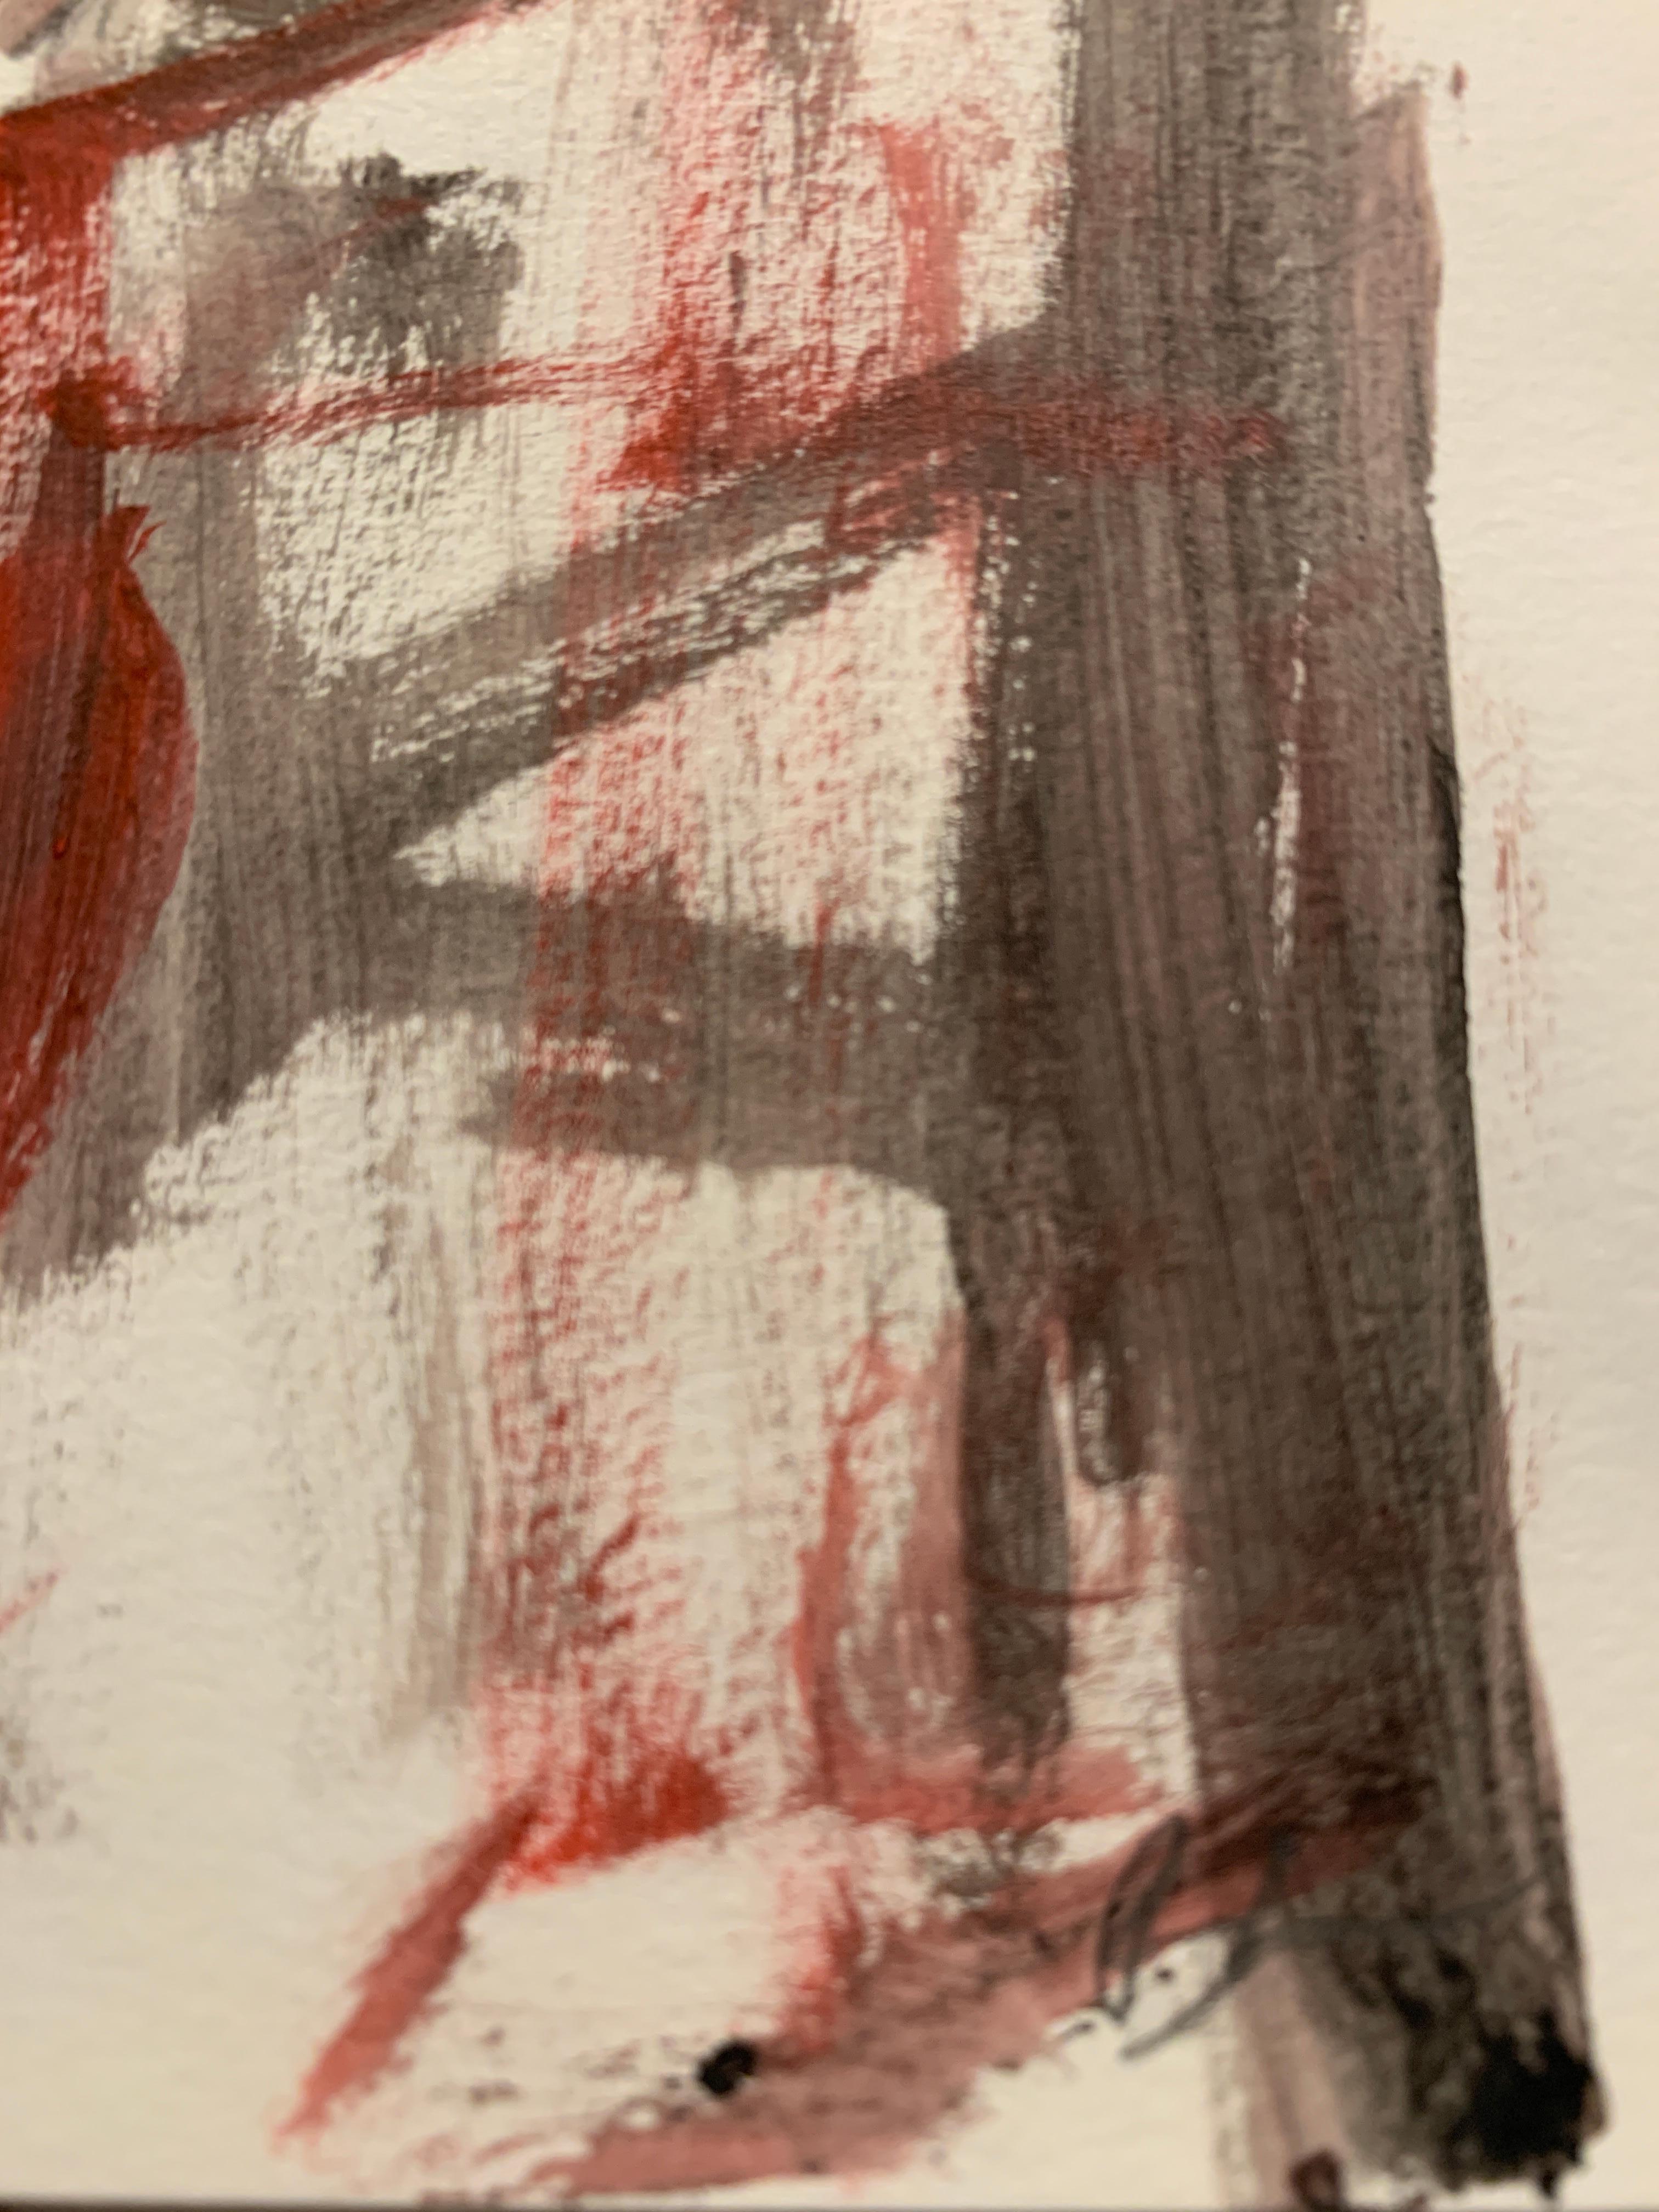 English abstract 20th century oil sketch of a figure in Red, Black and White - Abstract Expressionist Painting by Bertha Long